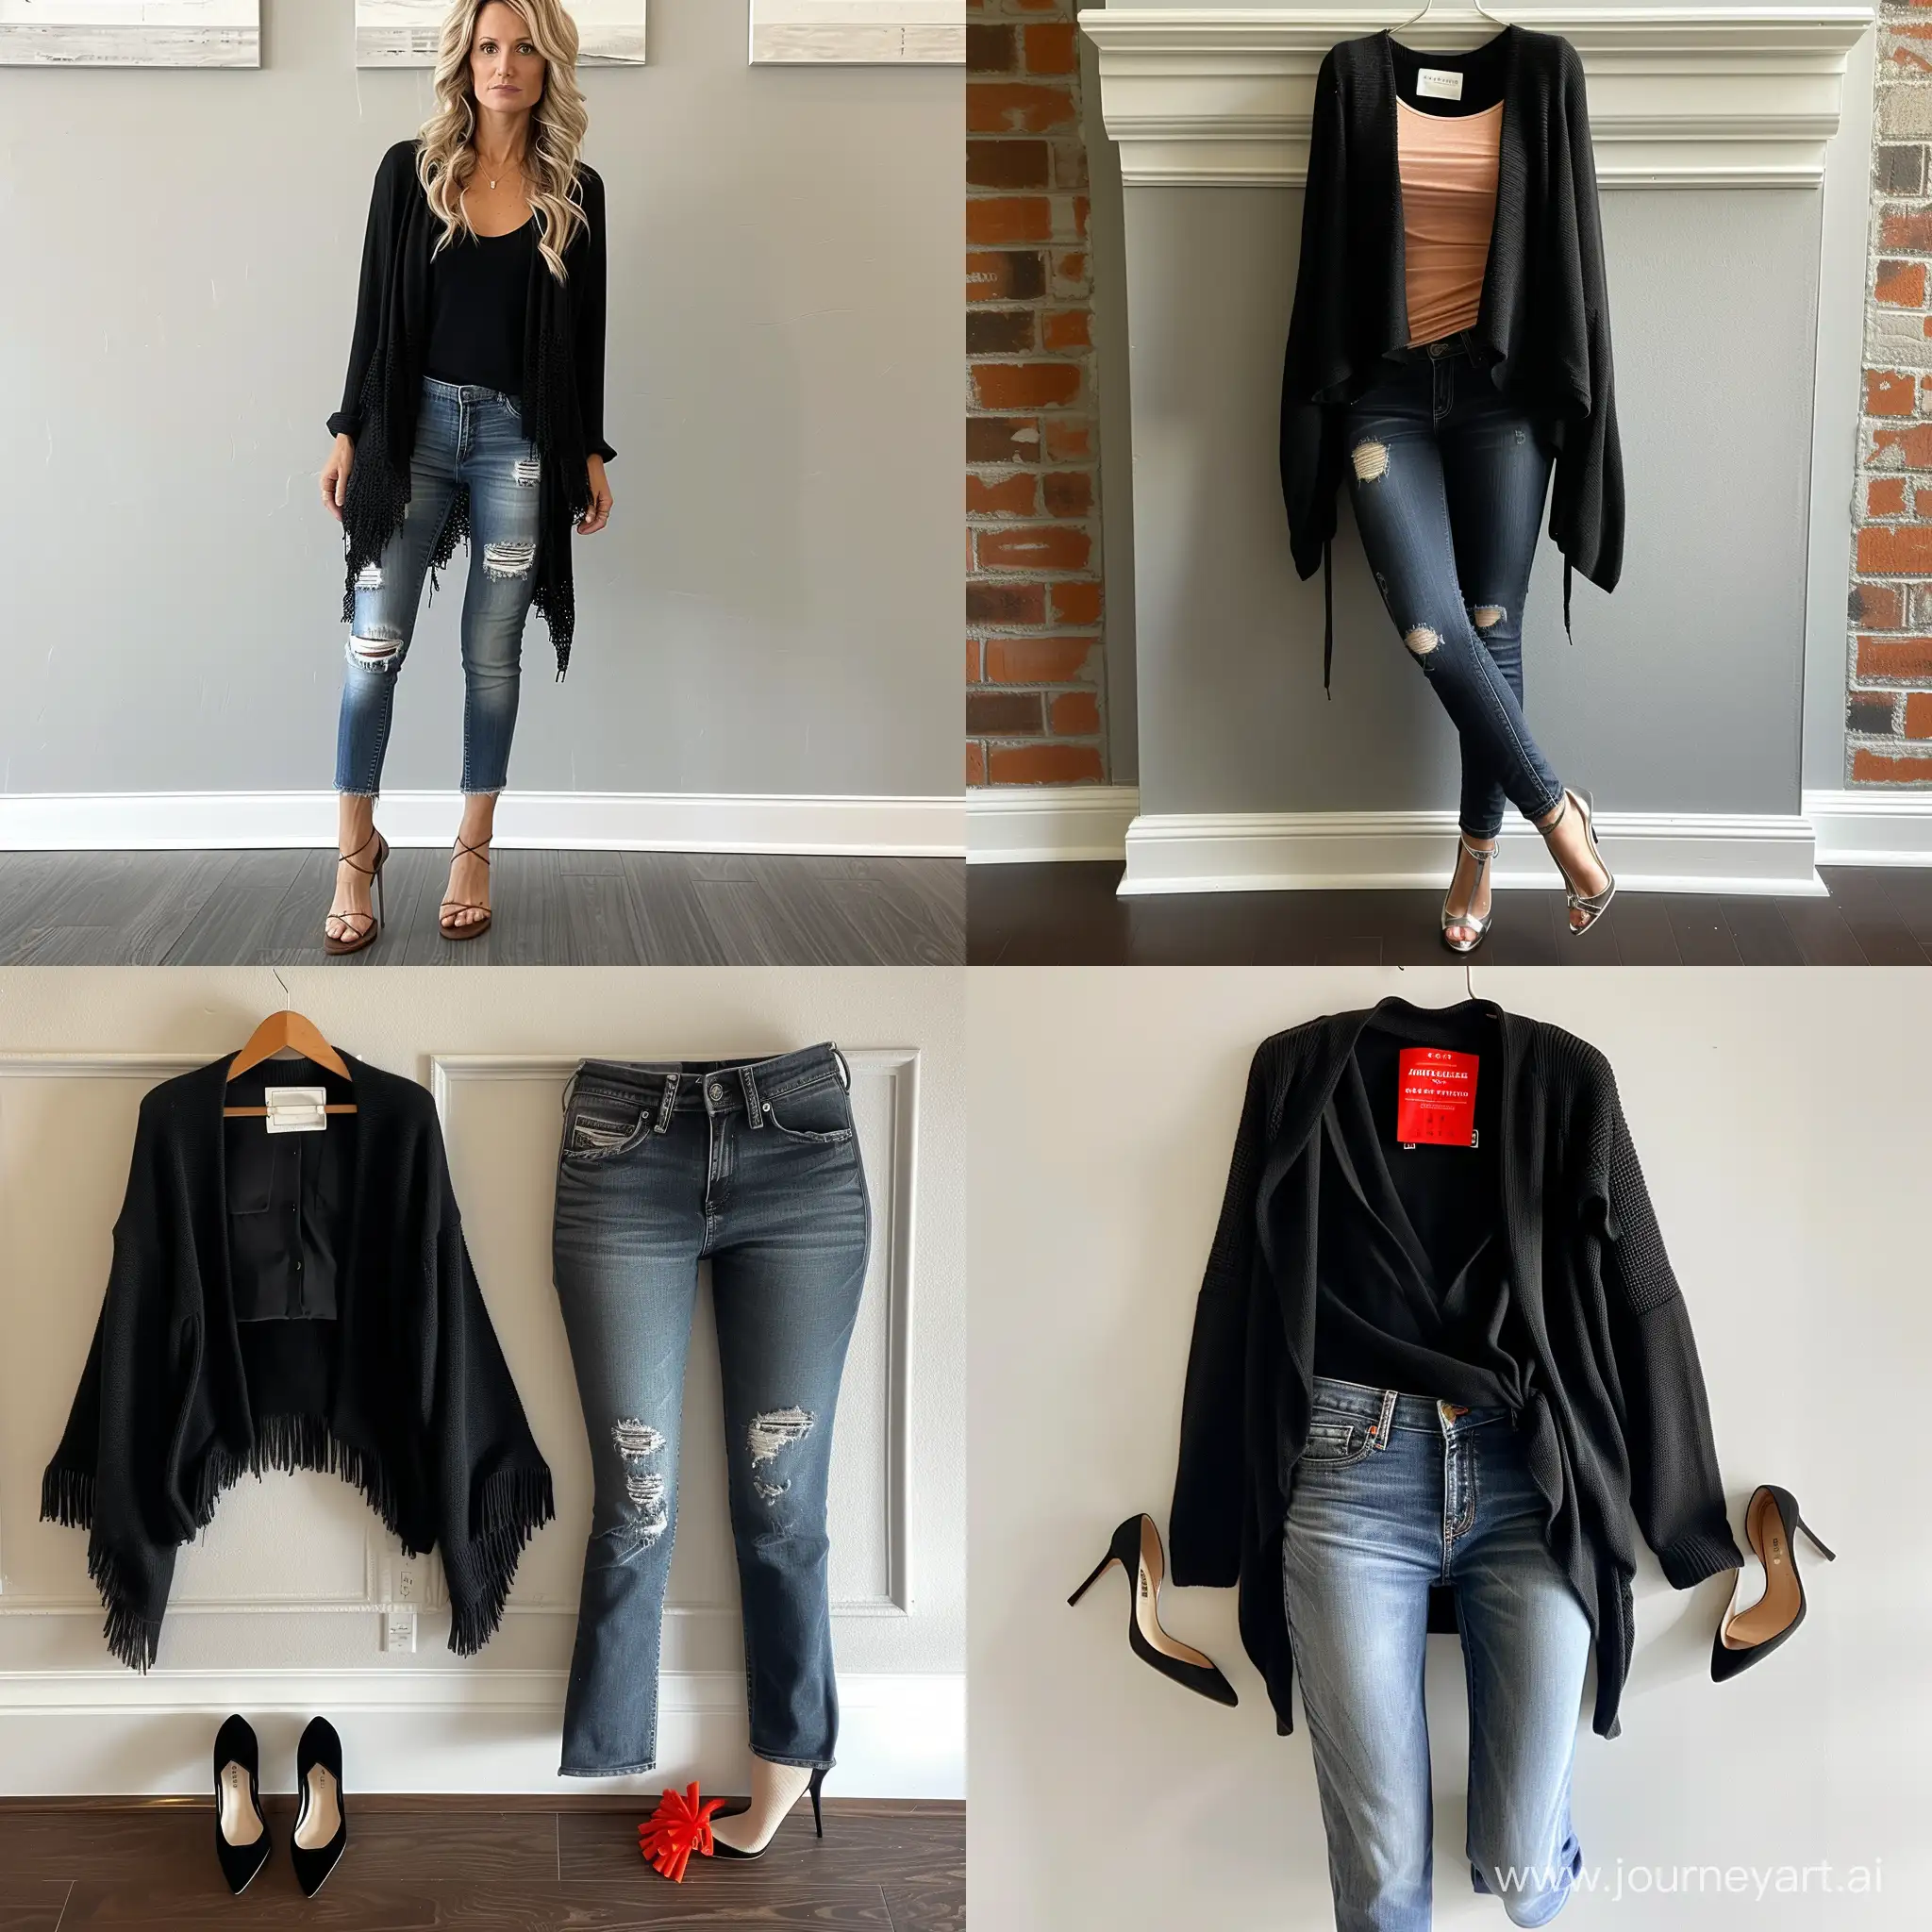 outfit black waterfall cardigan and american eagle jeans with high heels